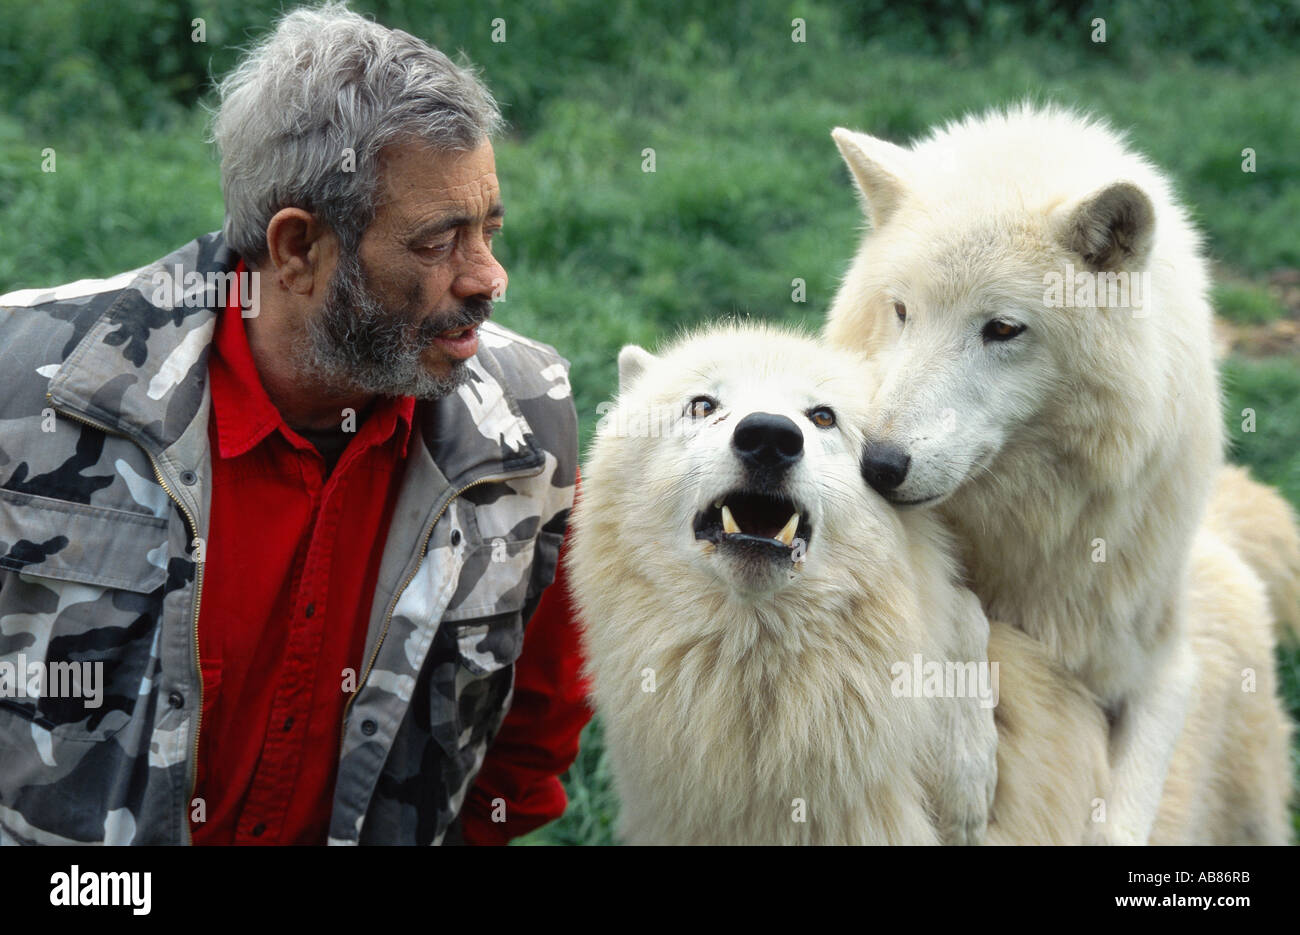 arctic wolf, tundra wolf (Canis lupus albus), Werner Freund with wolves; keen welcoming, Germany, Saarland, Merzig Stock Photo